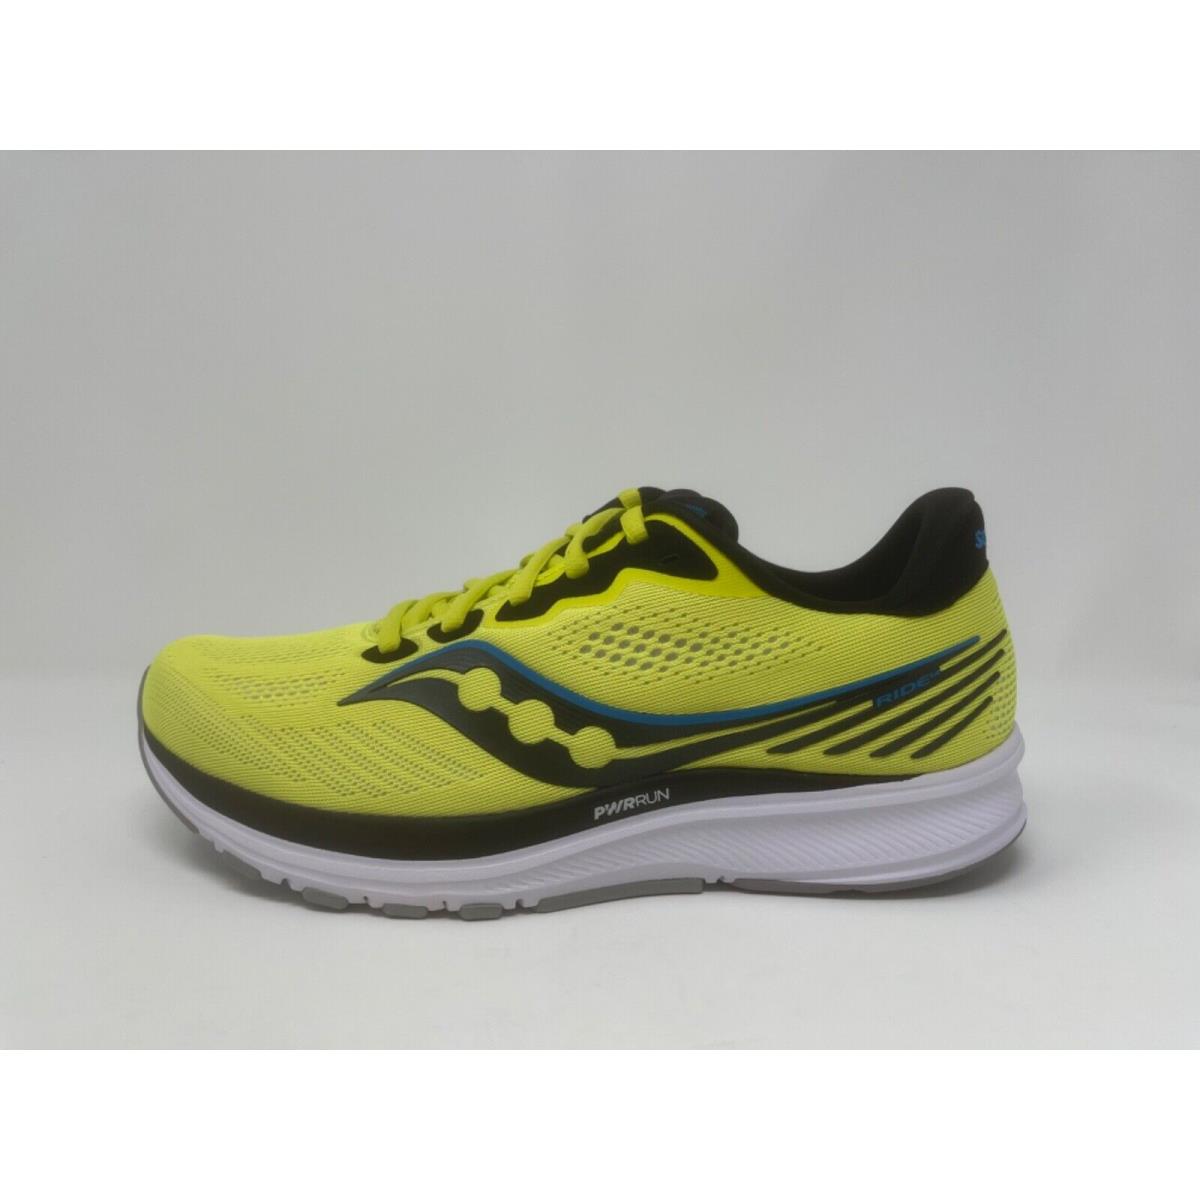 Saucony Men s Ride 14 Yellow Neutral Running Shoes